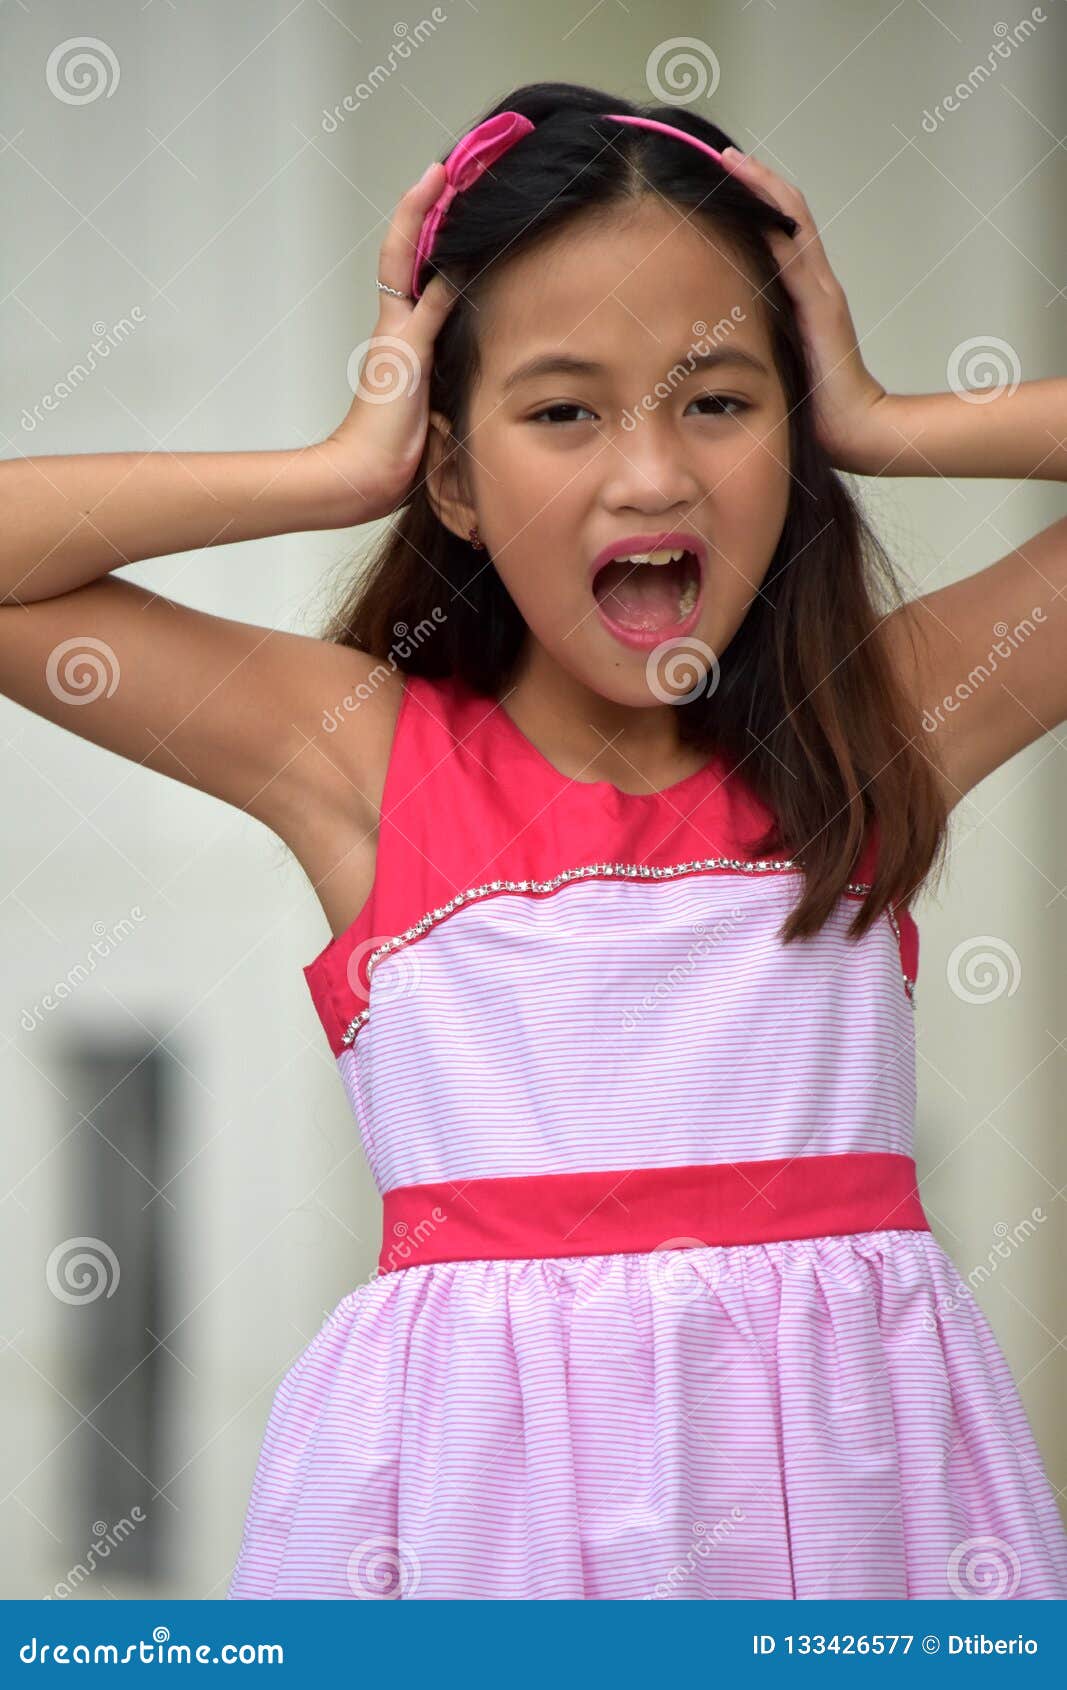 Young asian child 006 stock photo. Image of daughter 